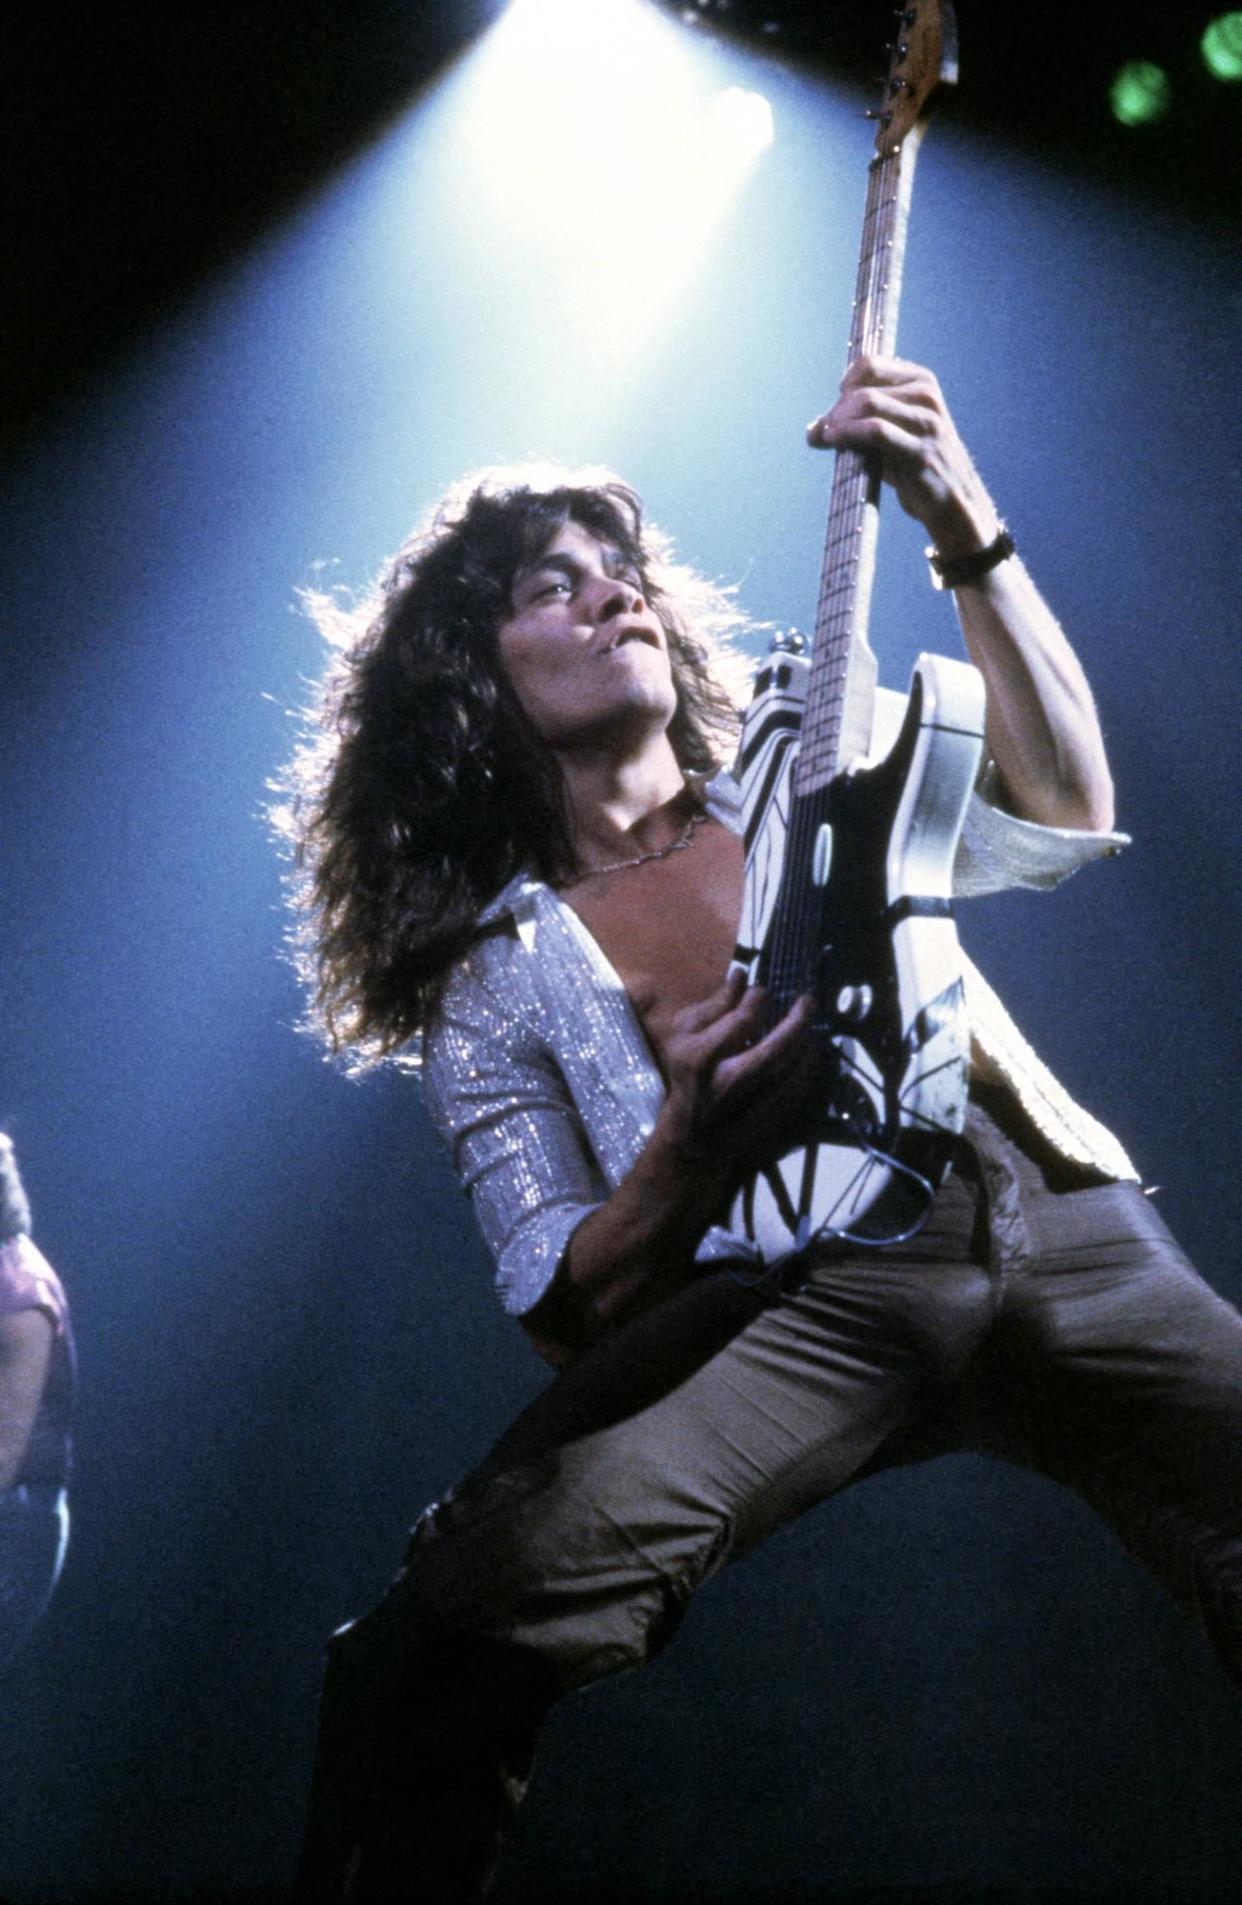 Eddie Van Halen in 1978. Forty years later, he said people didn’t recognize him quite as much as they used to, but sometimes he’d overhear them say while walking past, “Fuck, that was Eddie Van Halen!” - Credit: Fin Costello/Redferns/Getty Images